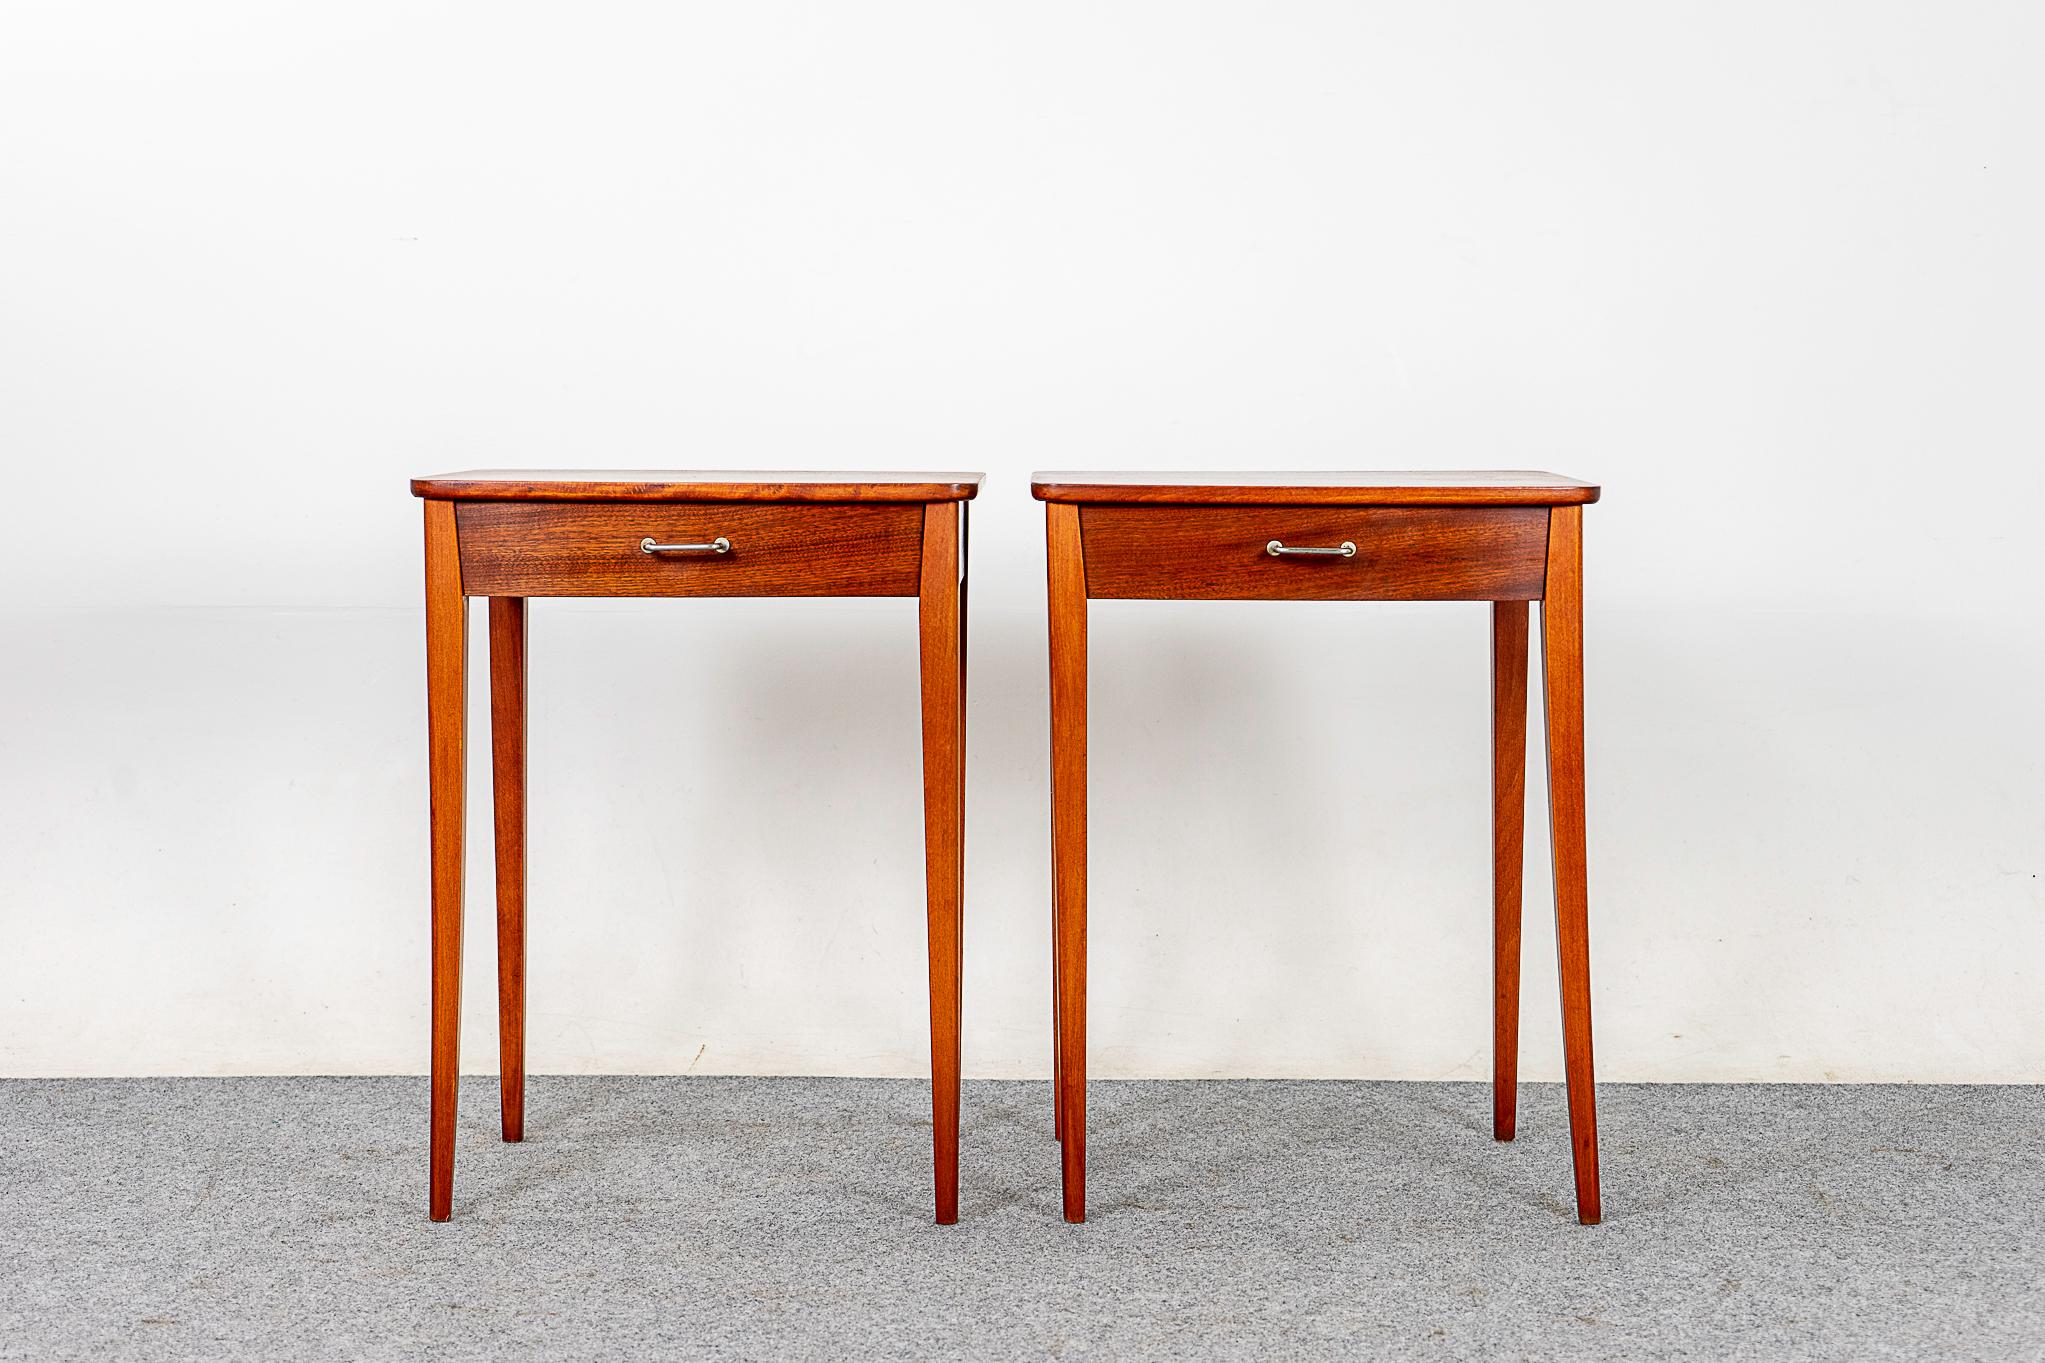 Set of 2 Mahogany bedside tables, circa 1960's. This pair of nightstands features beautifully veneered case, slender tapered legs and slim drawers with metal pulls.